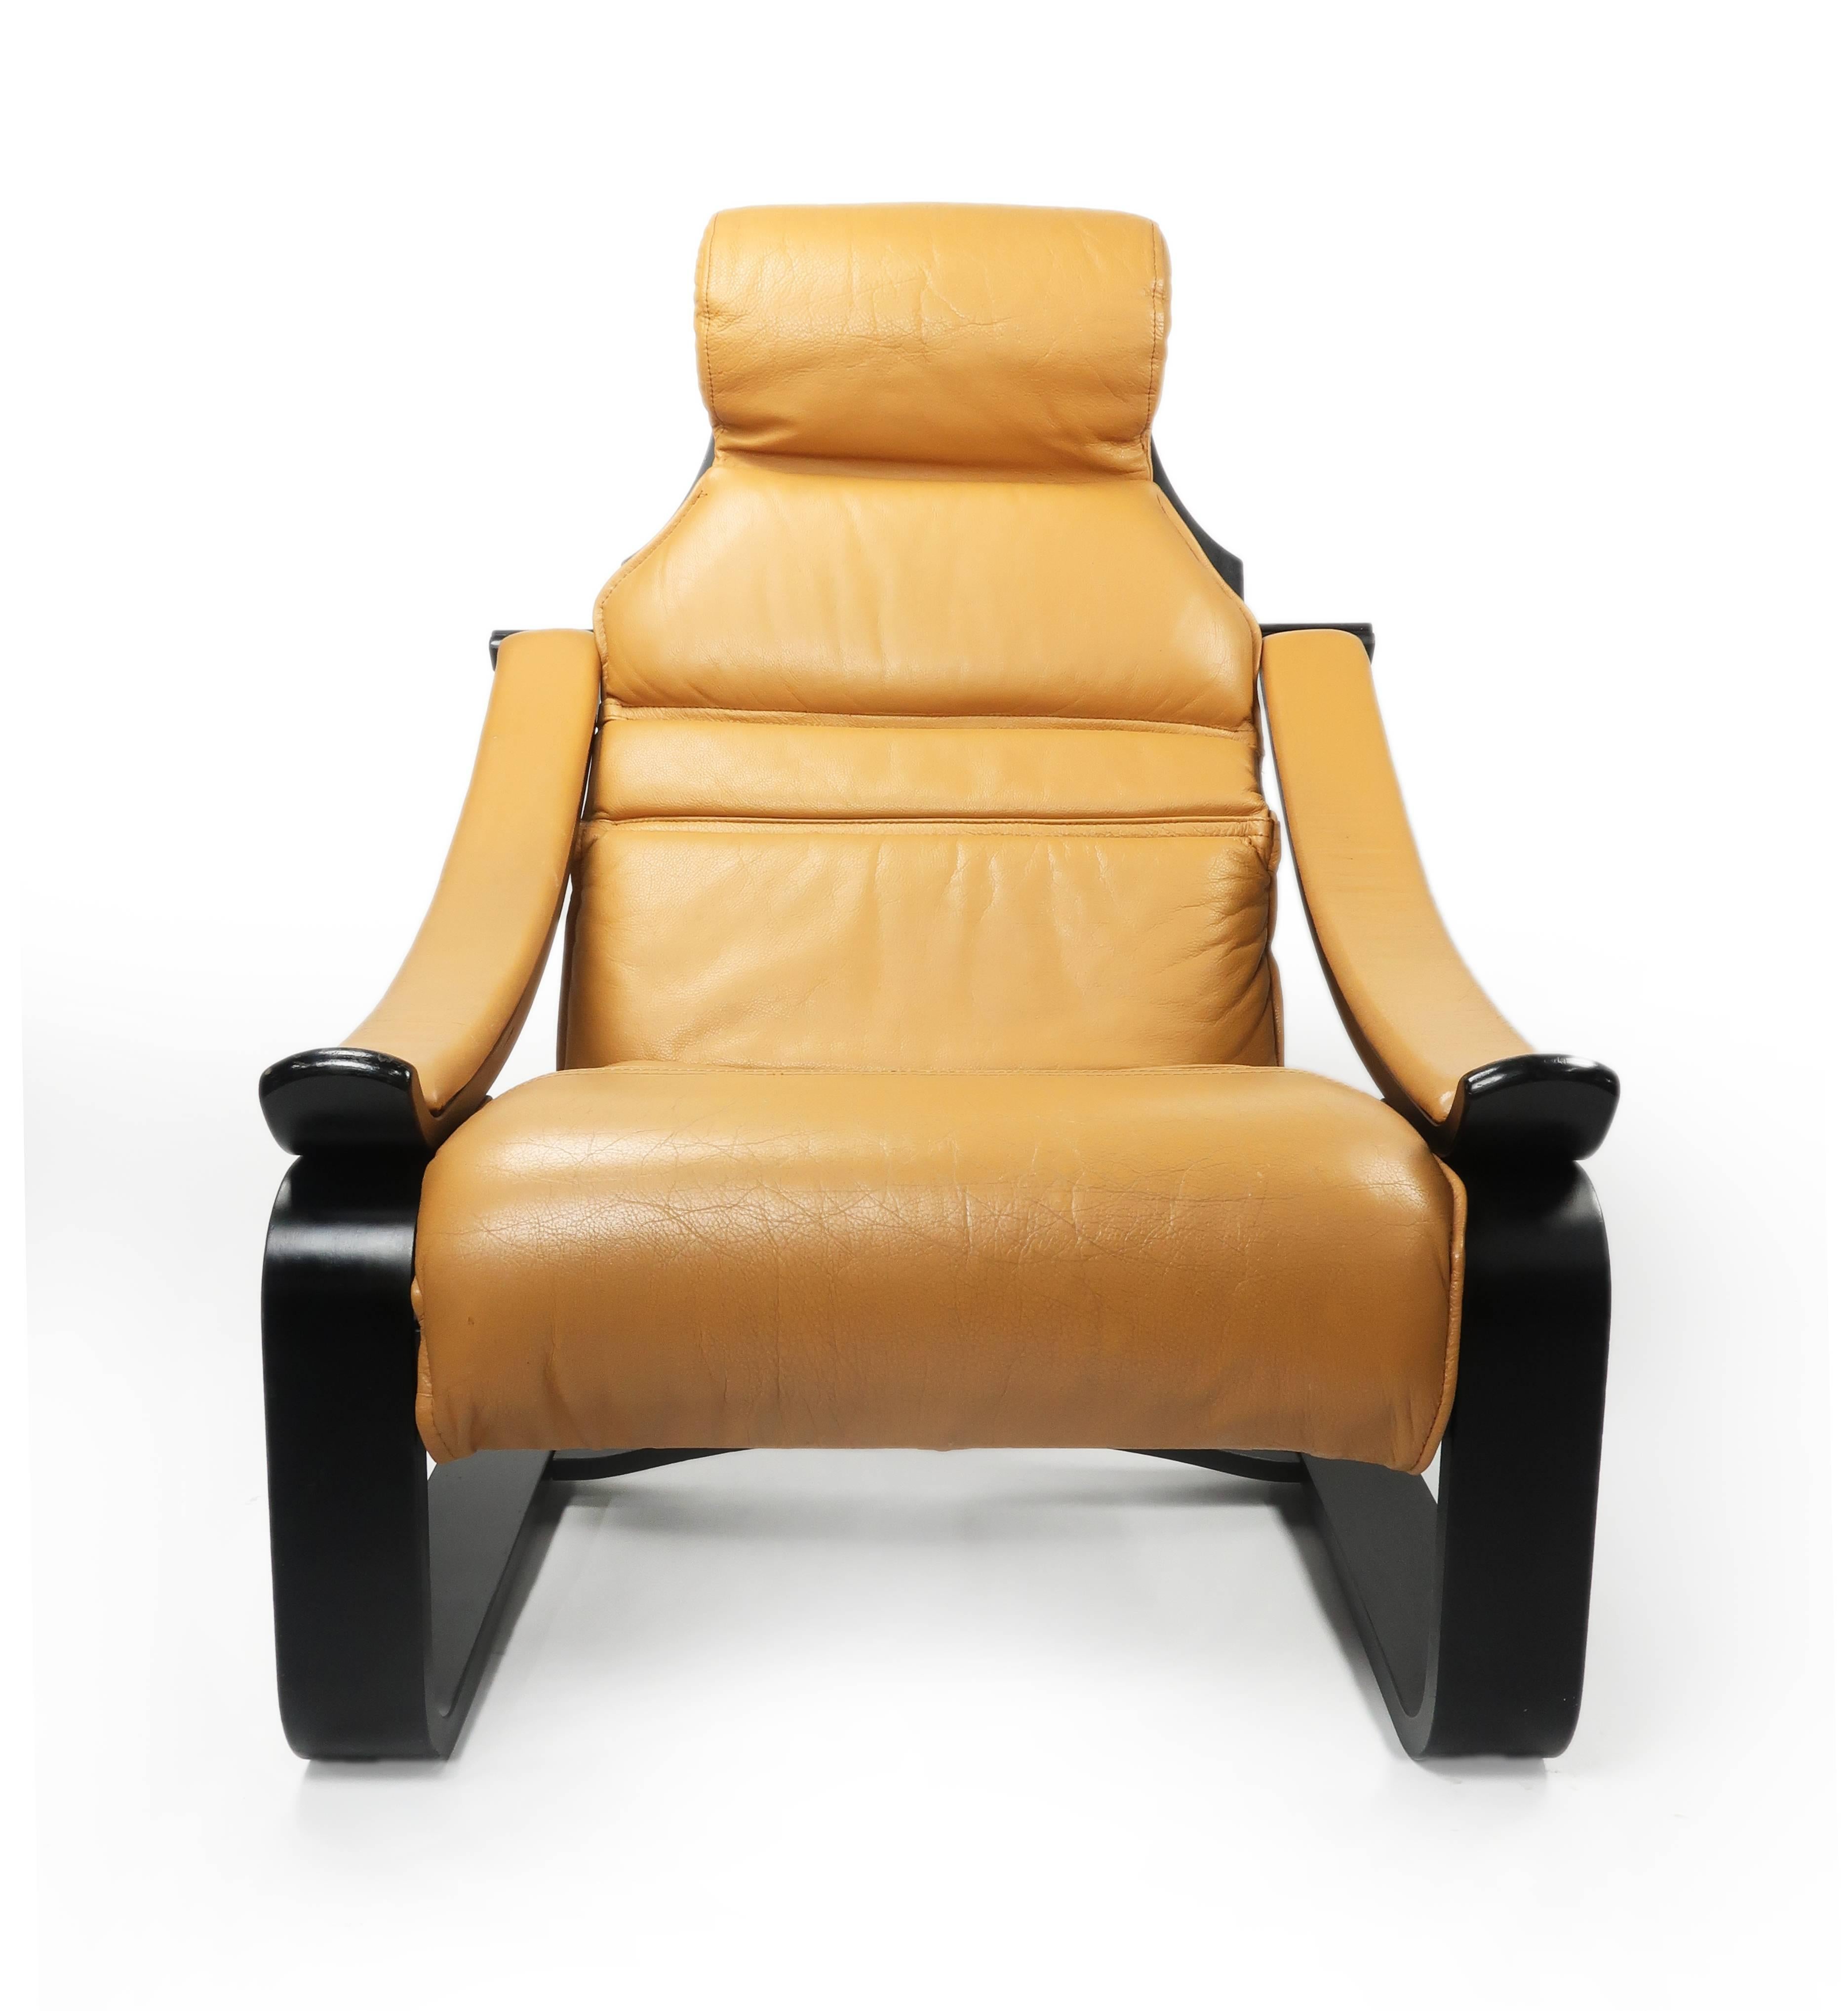 Late 20th Century Gregory Cantilevered Leather Lounge Chair by Scanform